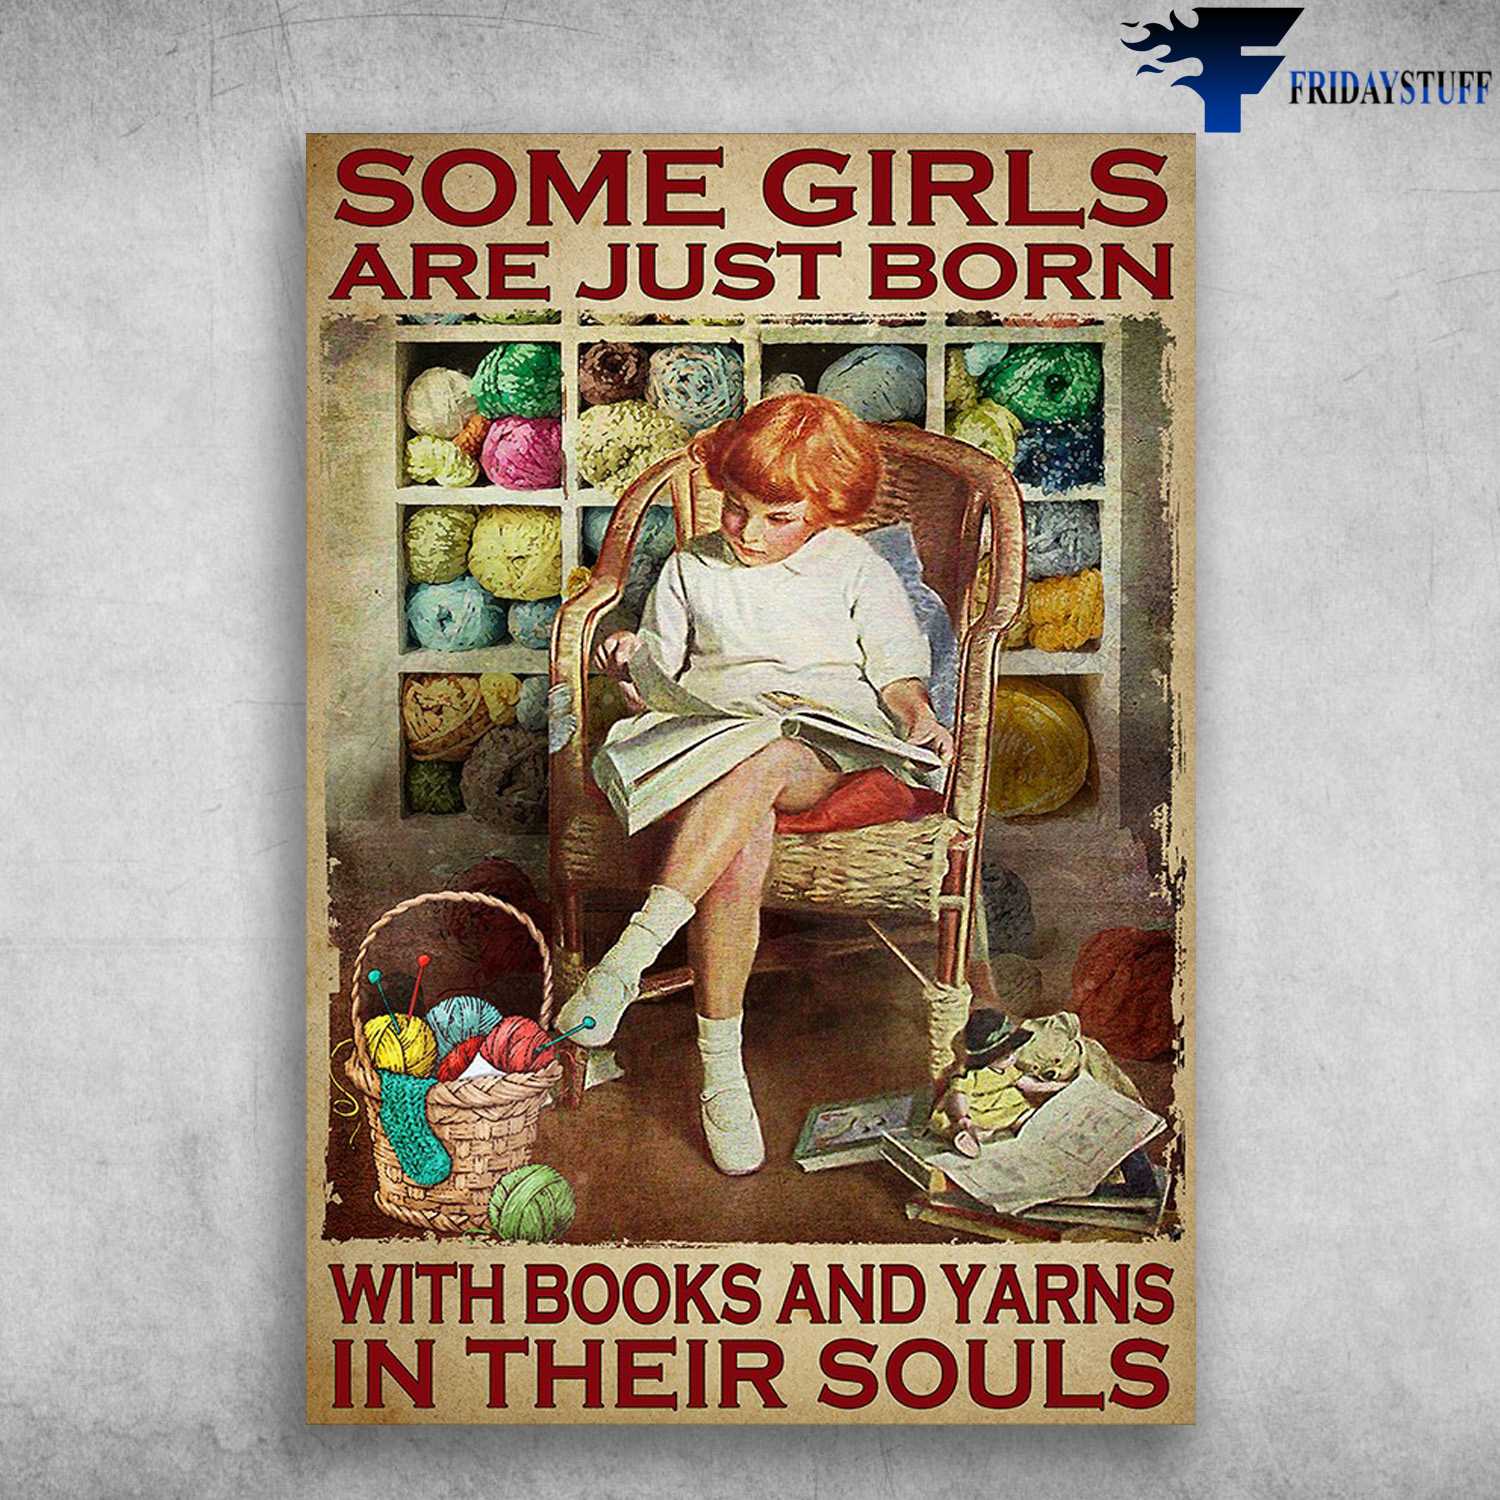 Girl Books And Yarns - Some Girls Are Just Born With, Books And Yarns, In Their Soul